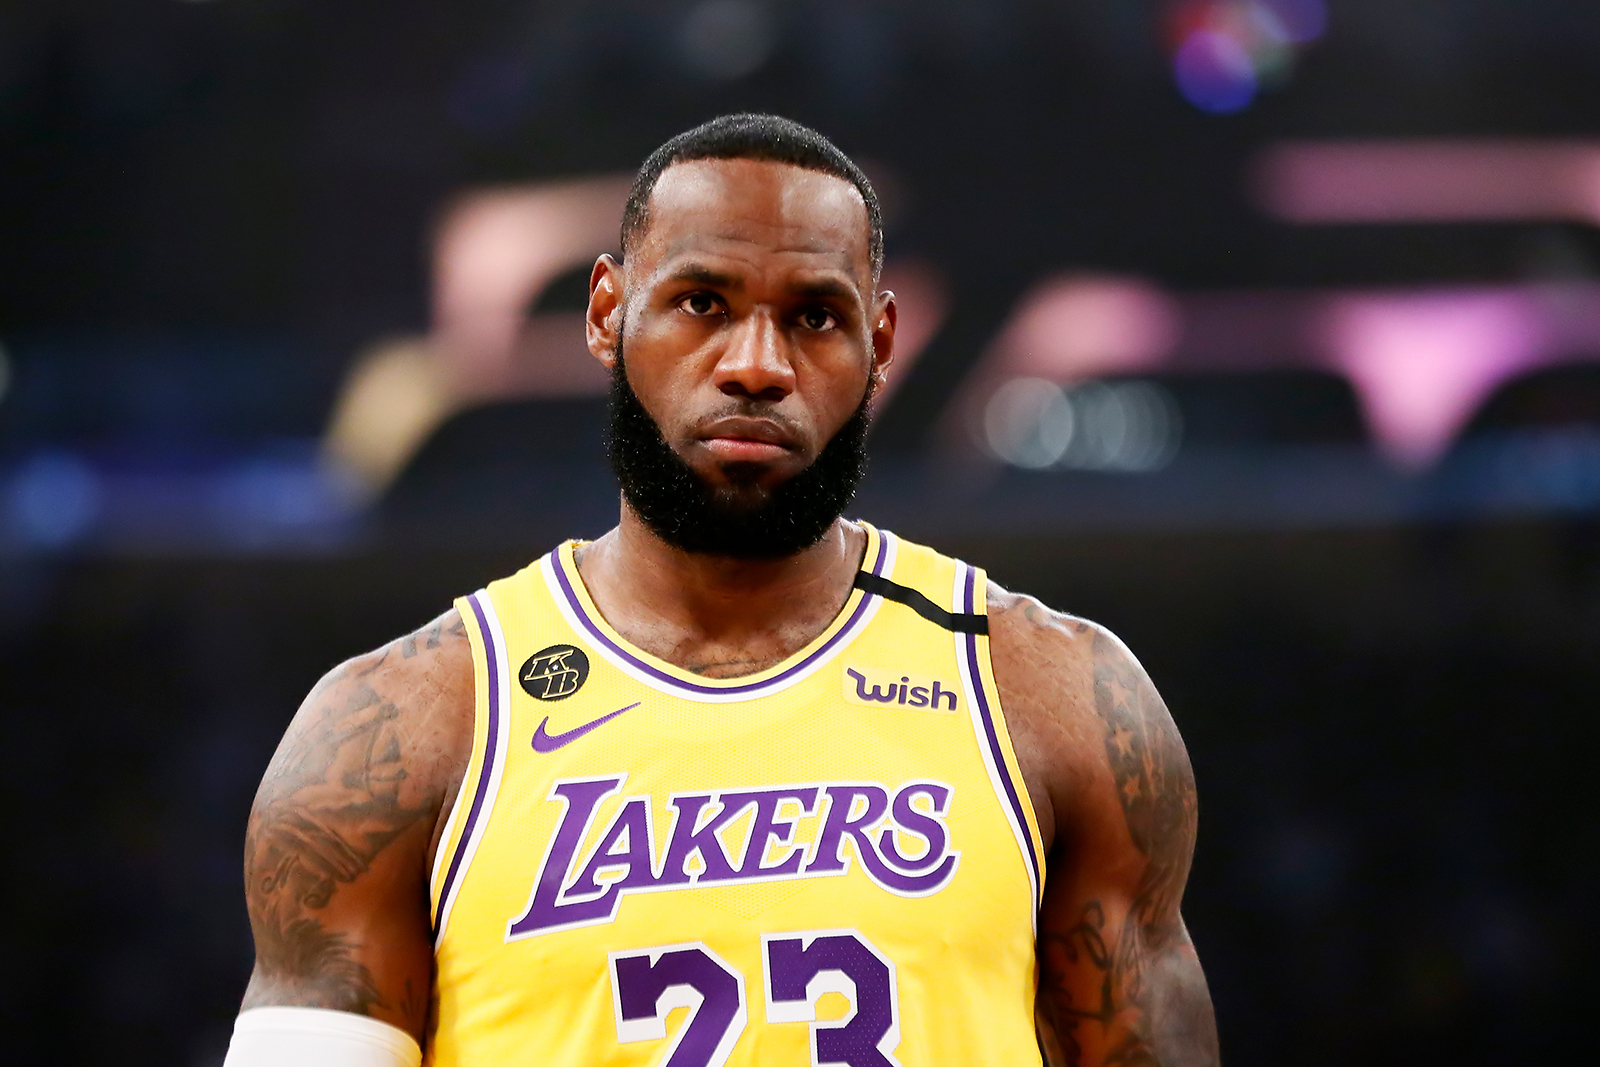 LeBron James of the Los Angeles Lakers looks on during a game against the Brooklyn Nets at the Staples Center in Los Angeles on March 10.